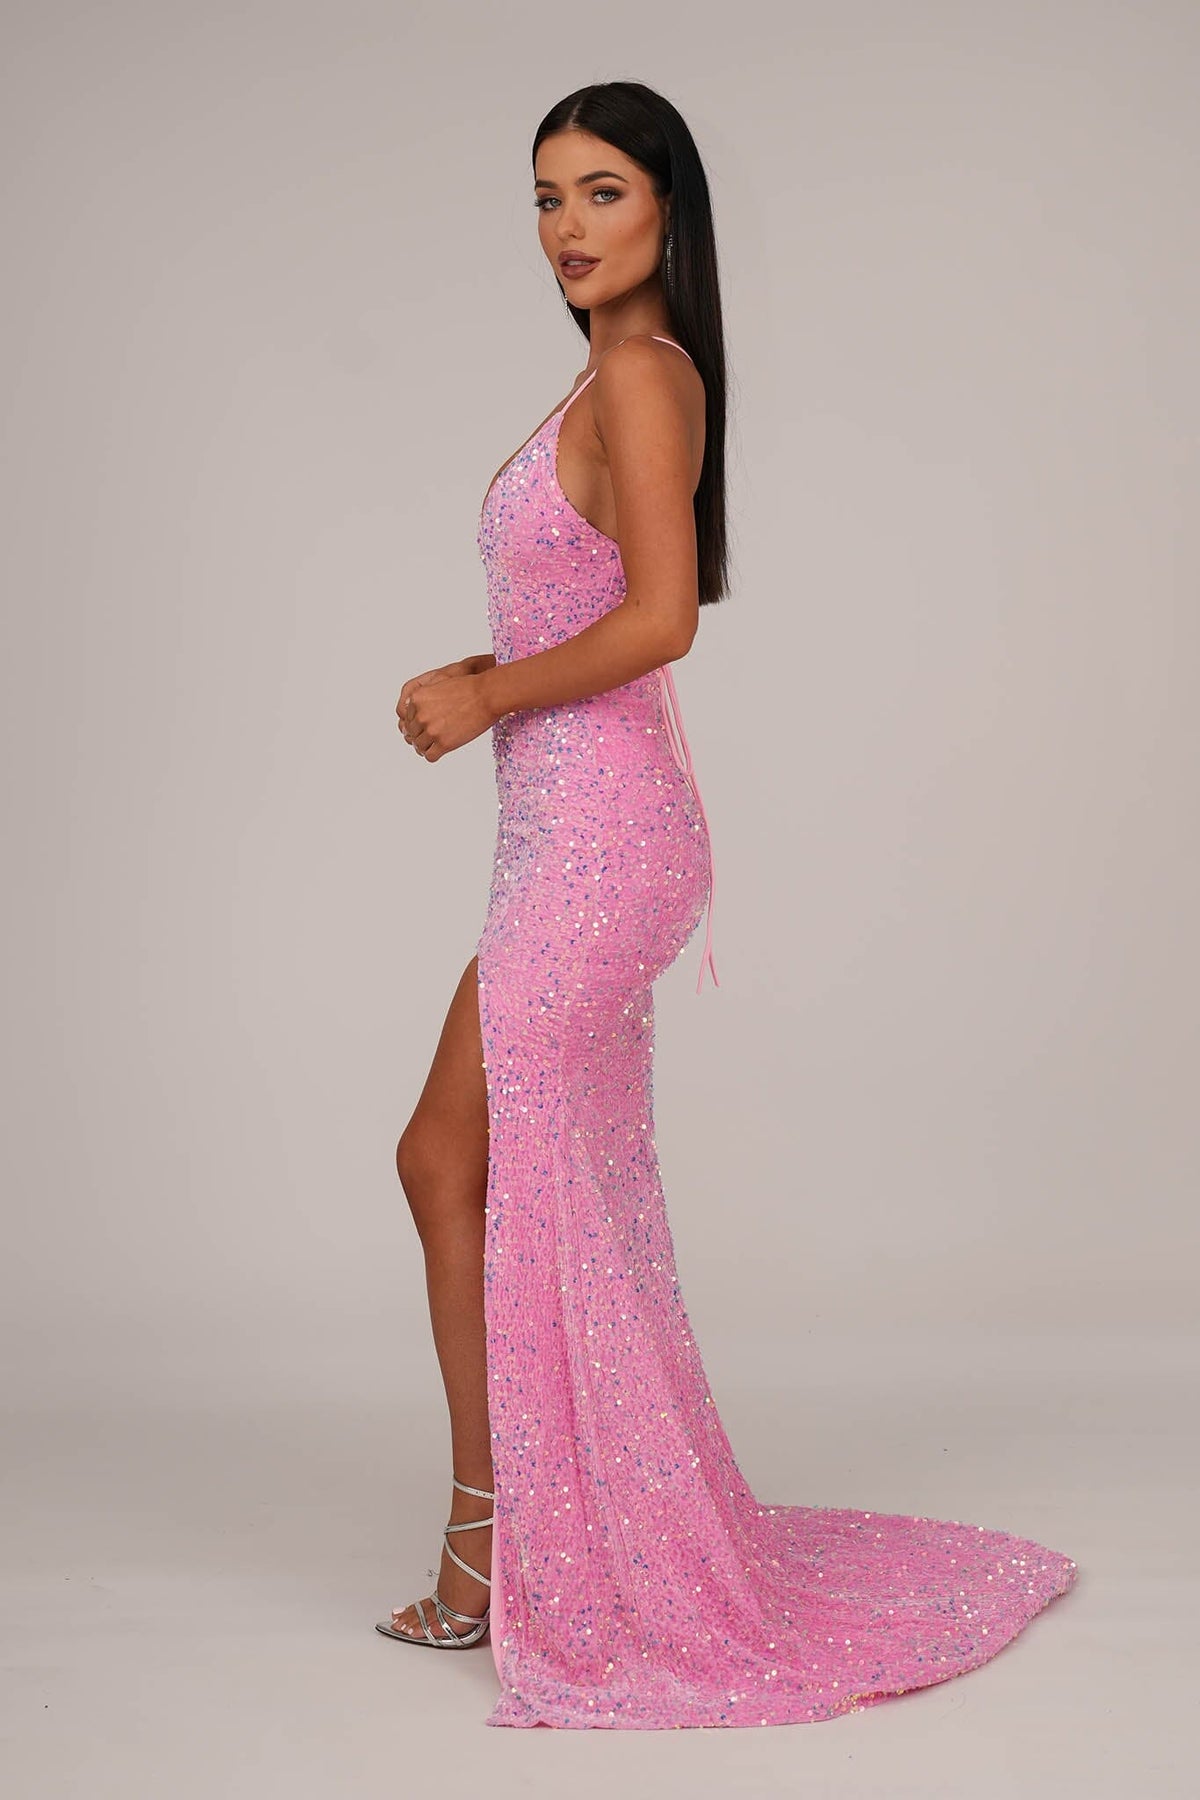 Side Image of Pink Velvet Sequin Full Length Evening Gown with V Neckline, Thin Shoulder Straps, Thigh High Side Split and Lace Up Open Back